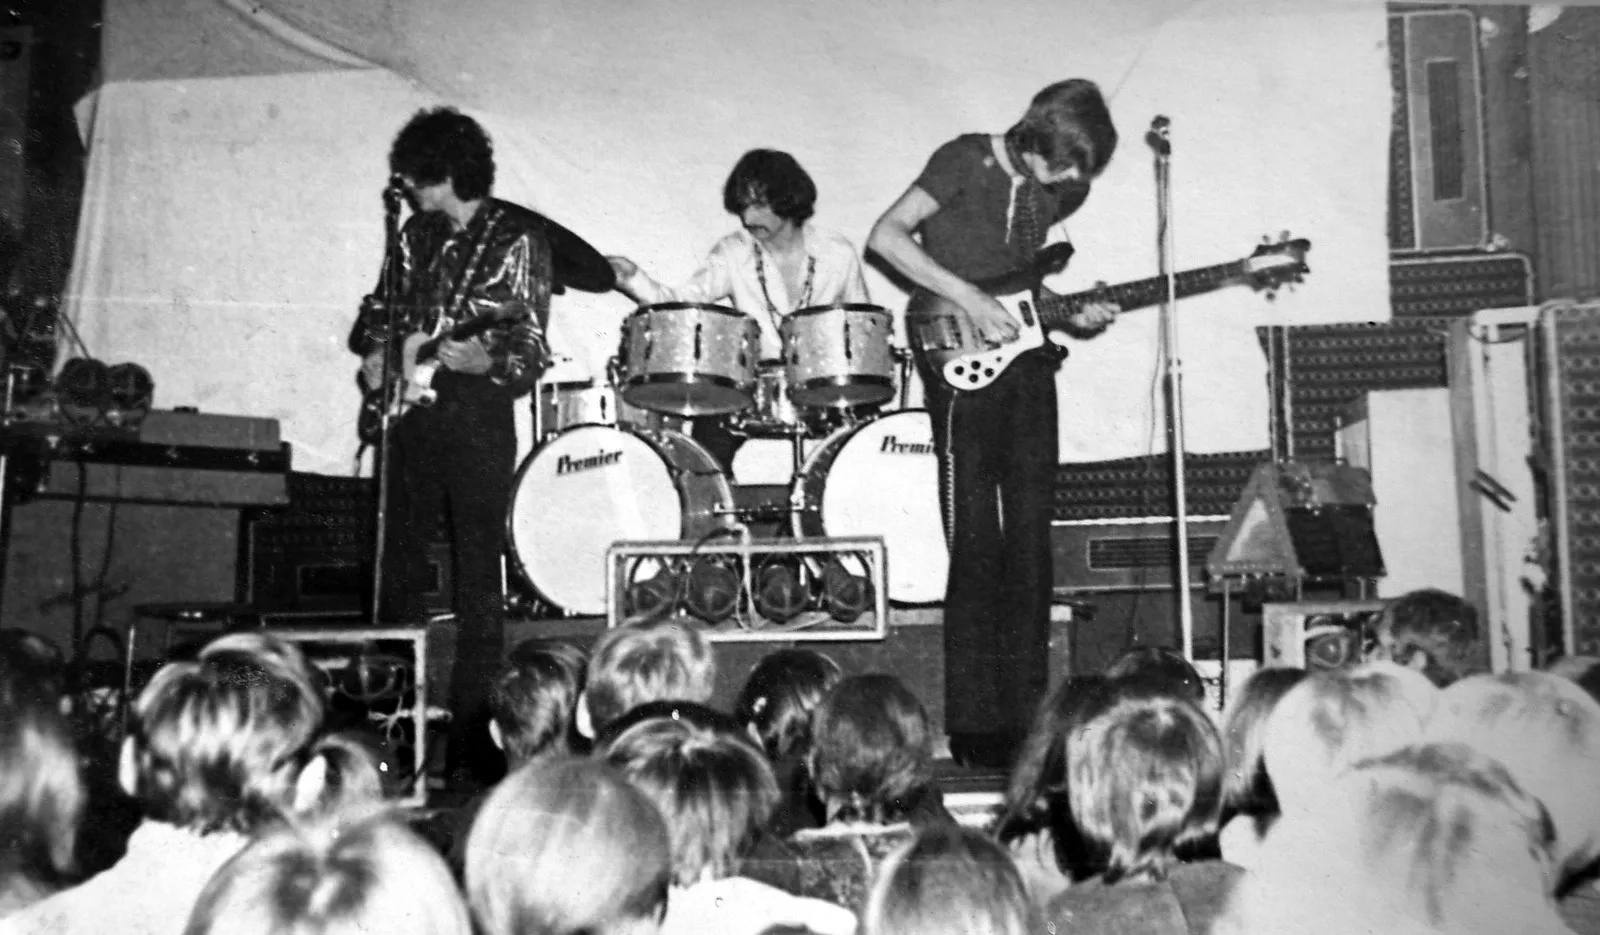 A vintage shot of Pink Floyd in their early days on a small stage